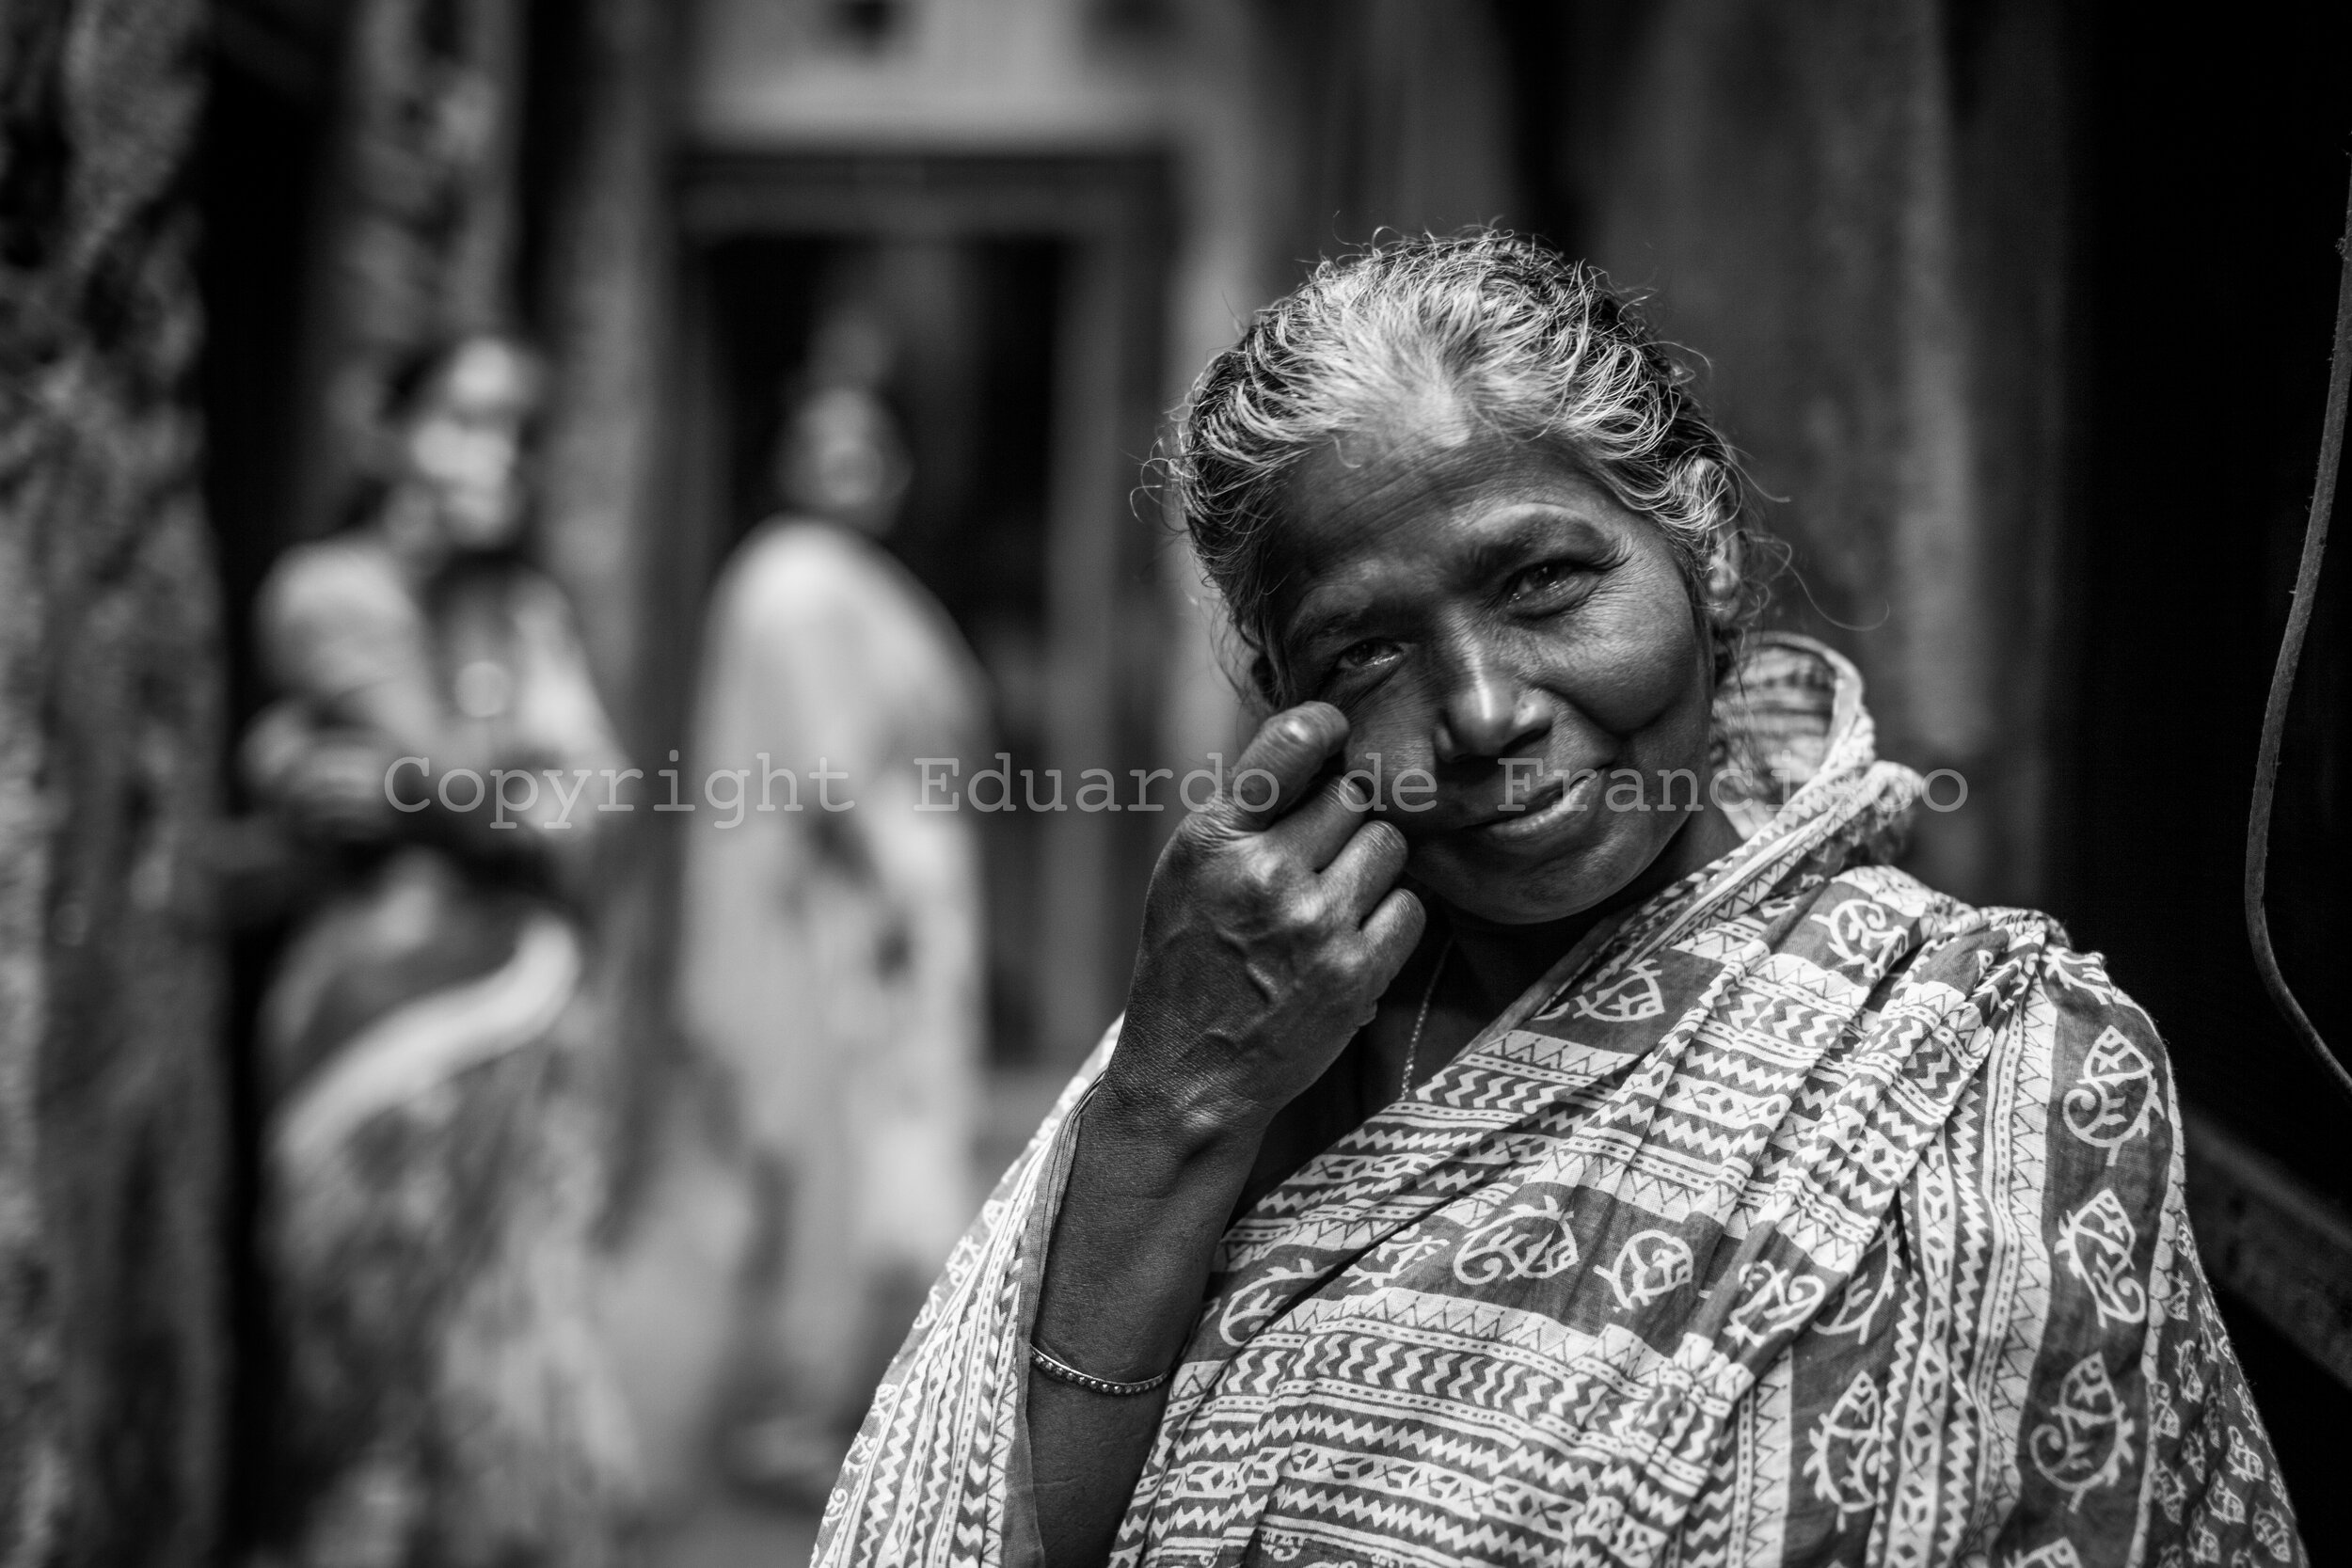  Daya Dolay, 65, lives in Sonagachi since she was 18. She worked as a prostitute for 15 years, then as a servant for 25 more years. Now, she has neither work nor other means of subsistence. 